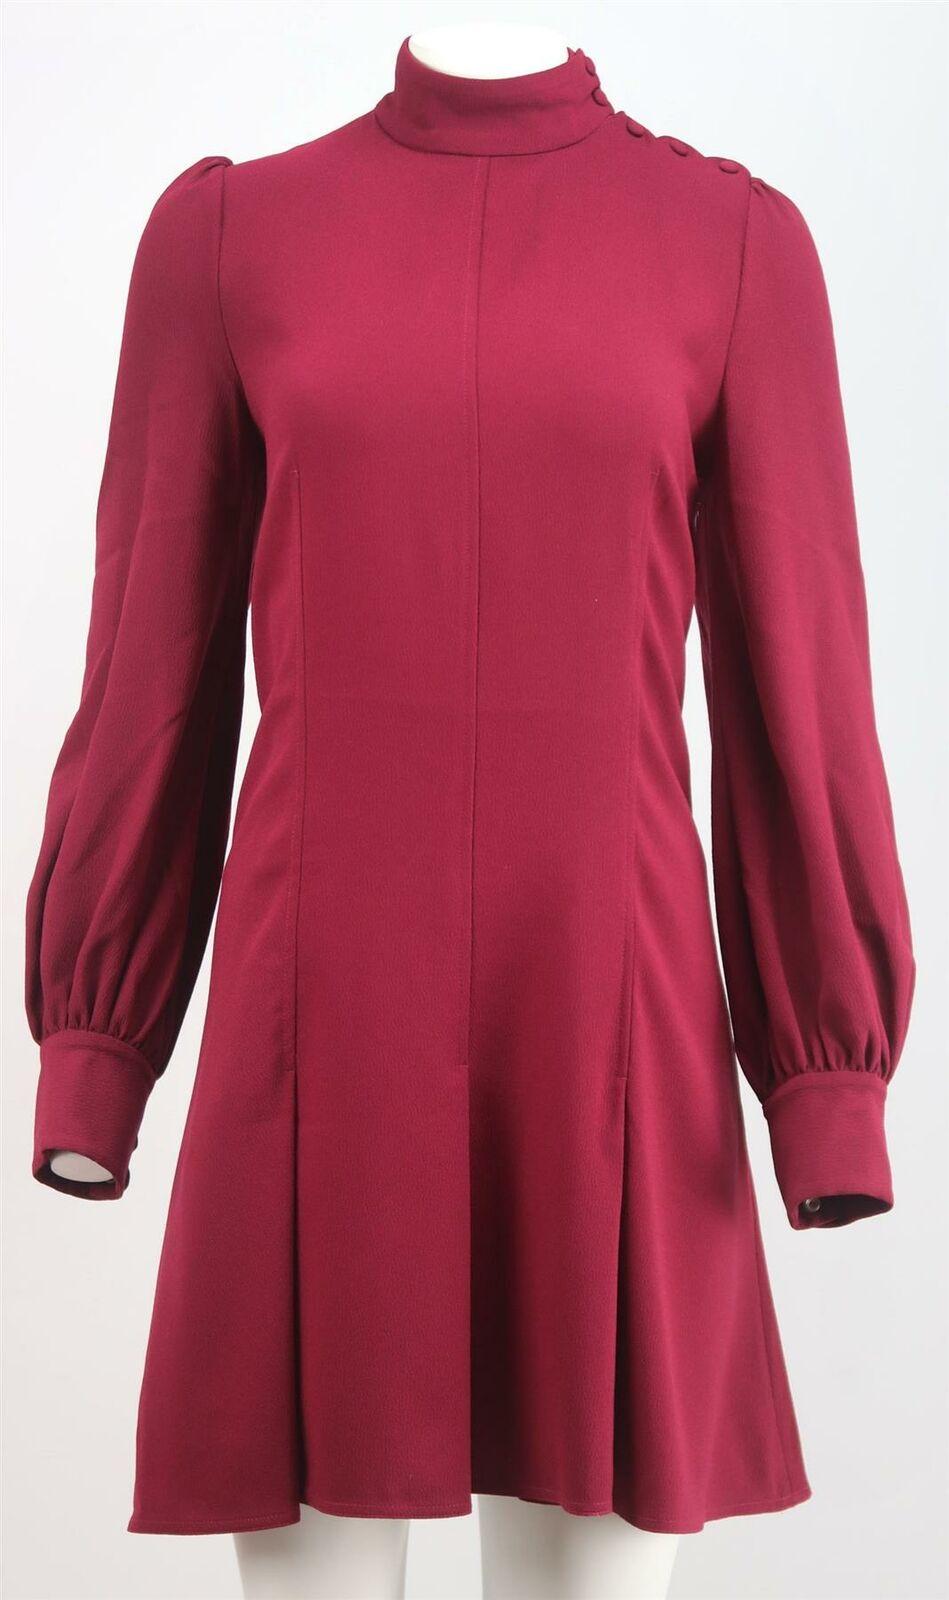 Proenza Schouler's dress is sophisticated, timeless and never goes out of style, cut from textured crepe, this mini version has a high neck, puff sleeves and a wispy skirt and is accentuated by soft pleats.
Burgundy crepe.
Button fastening at